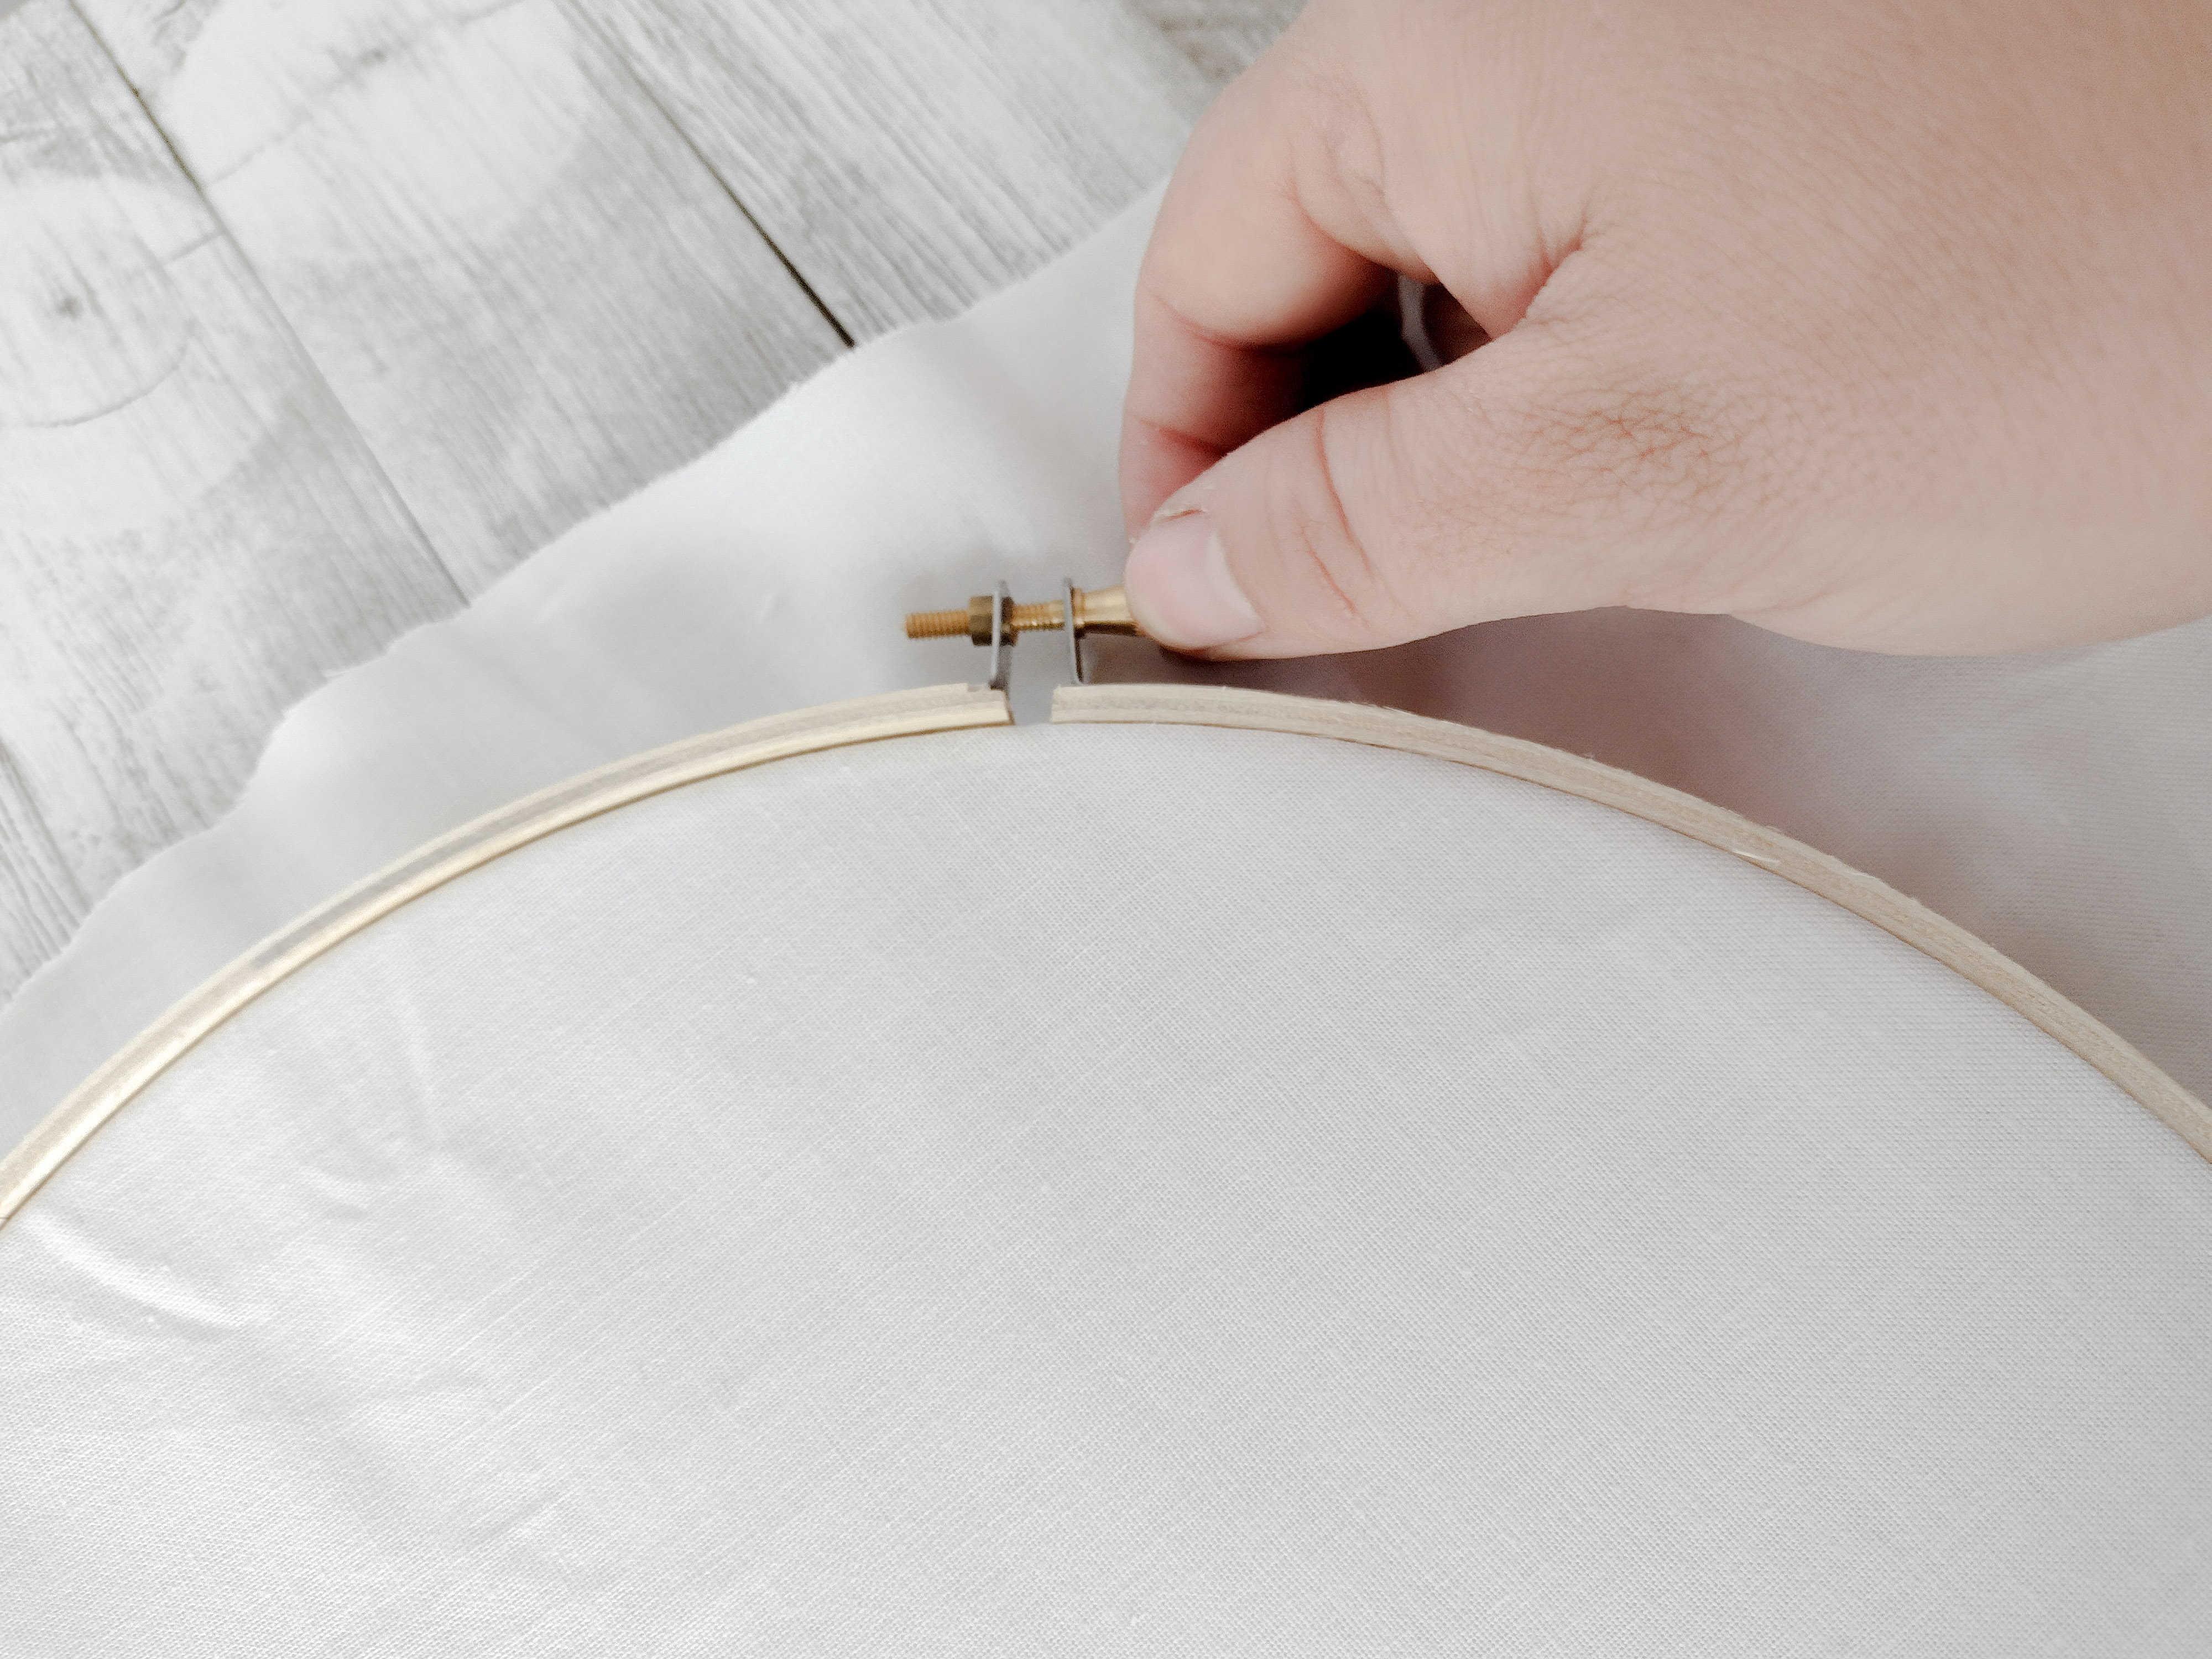 hot to put an embroidery hoop on